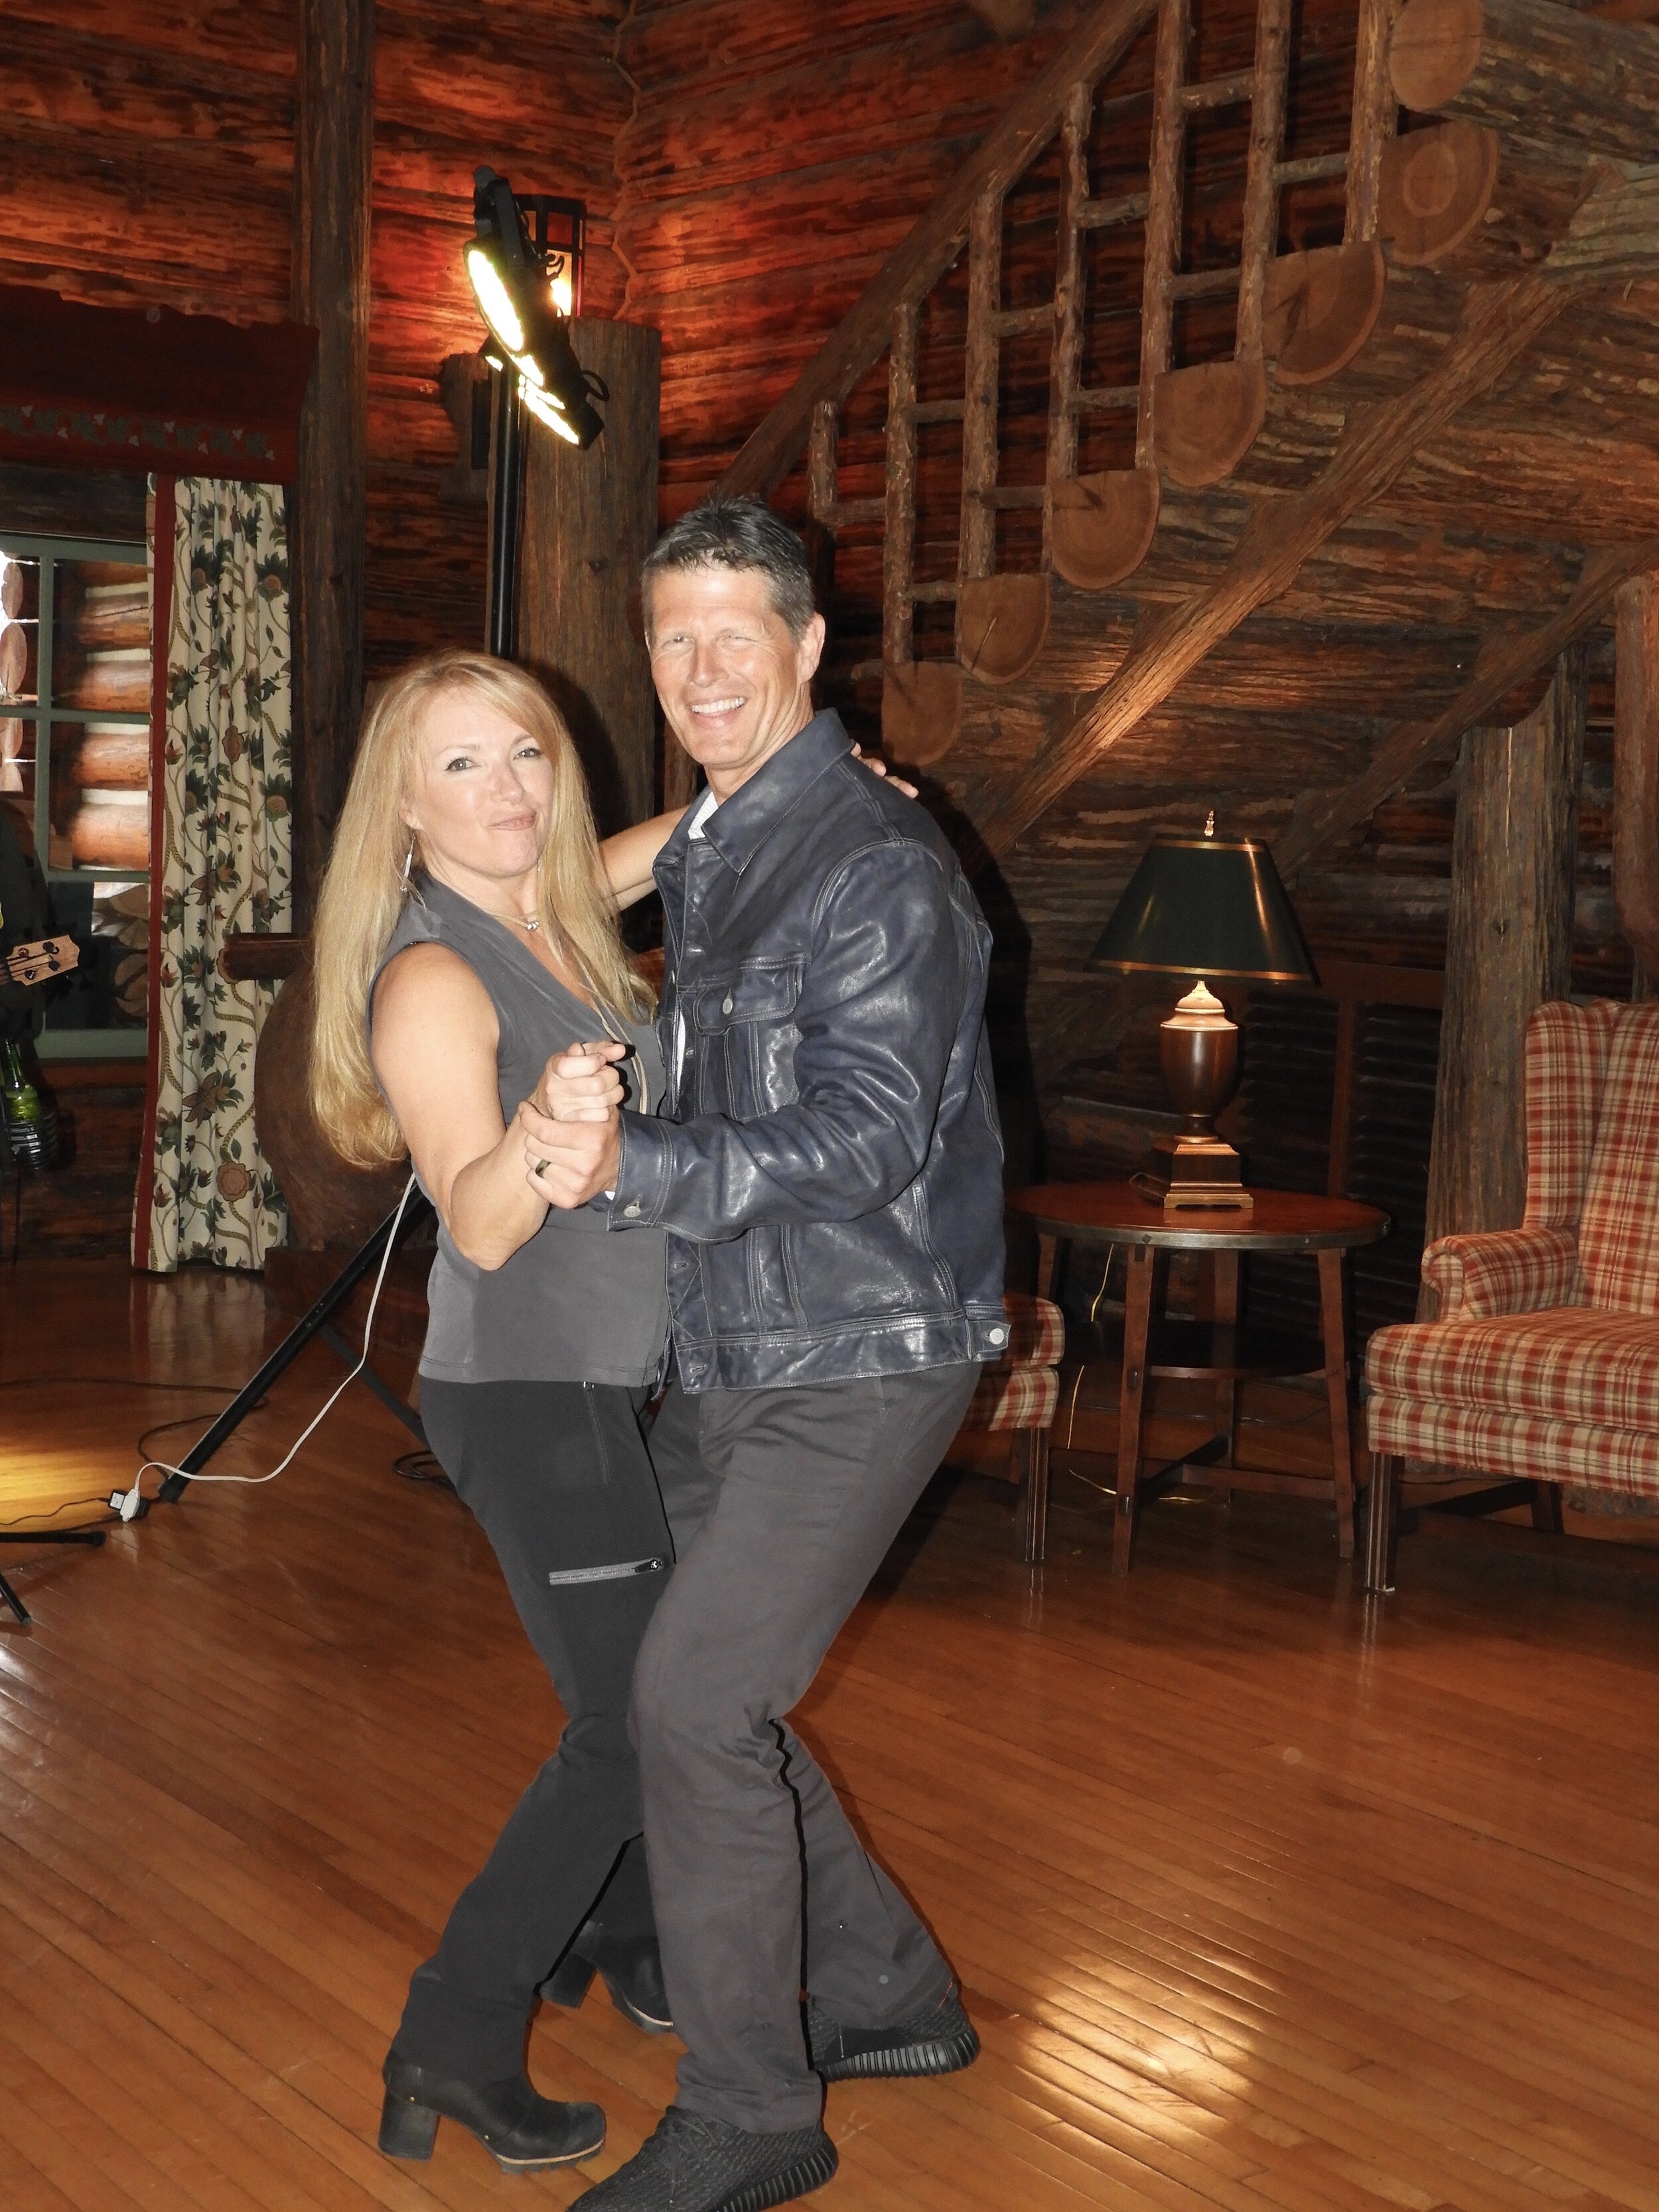  Laura and husband Paul dancing in the Lodge at an Easter party, April 2019 